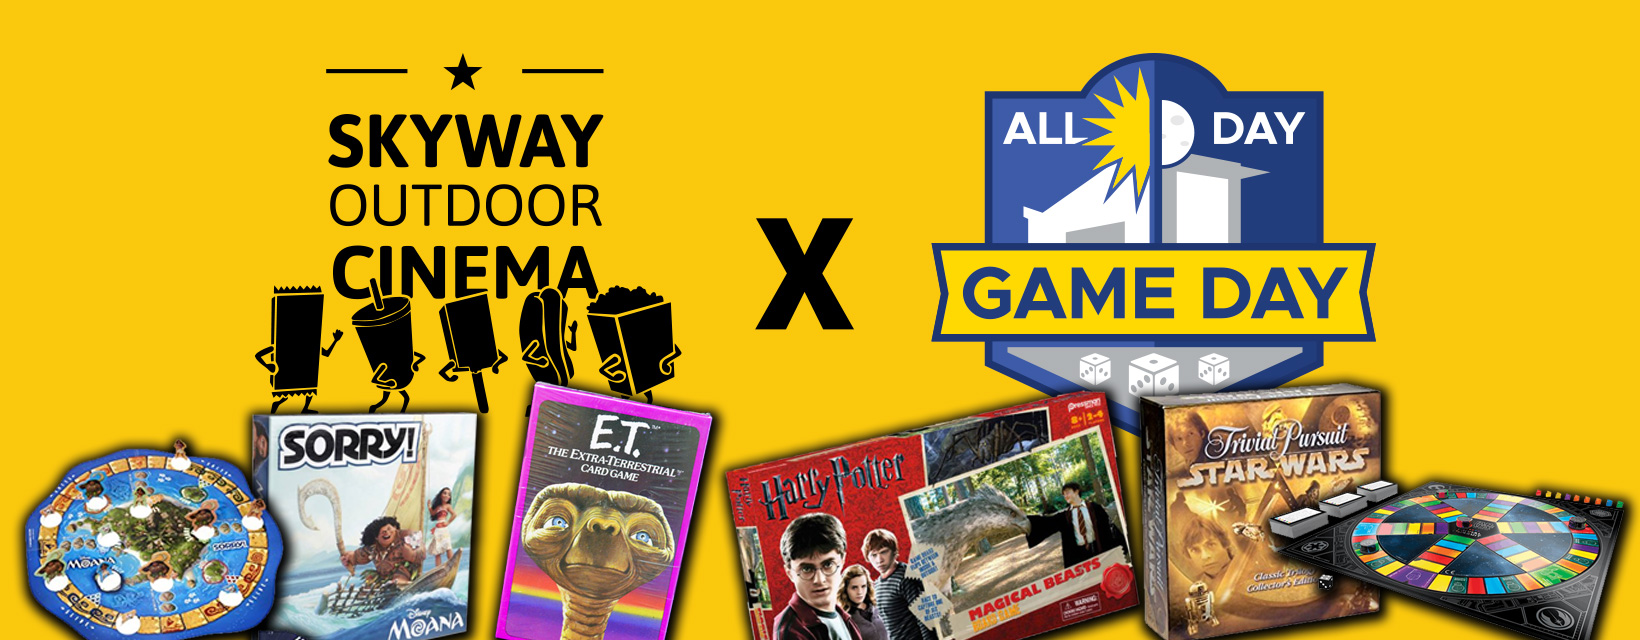 Skyway Library’s All Day Game Day featuring Skyway Outdoor Cinema 2017